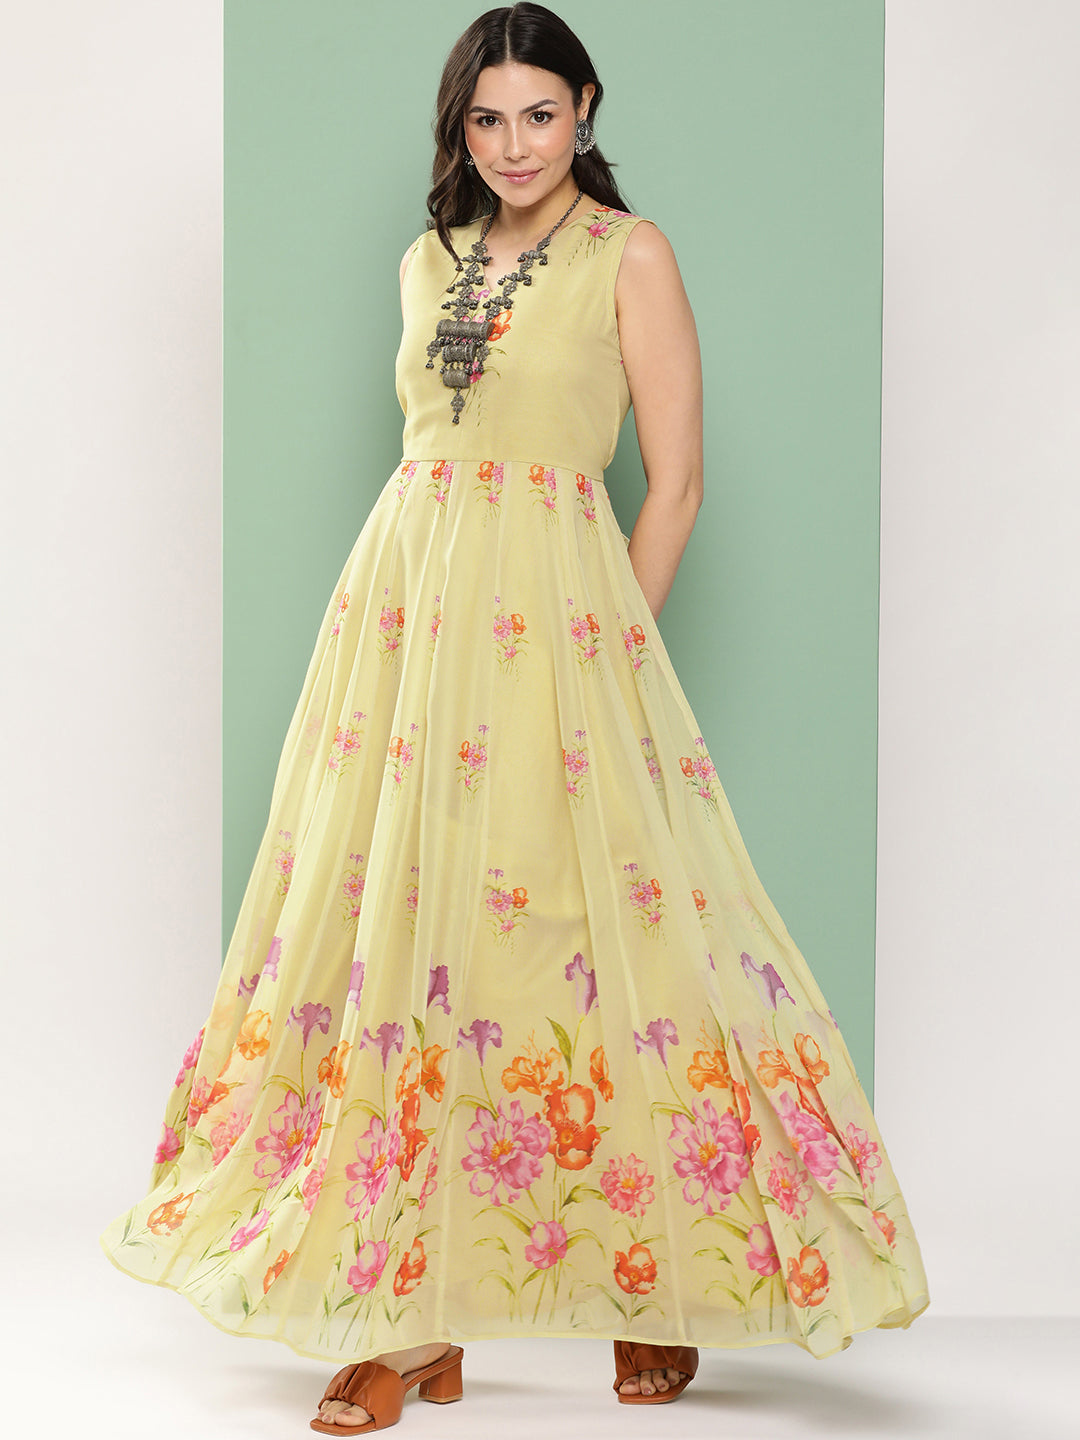 Bhama Couture Yellow Printed Long Dress V-Neck With Lace Details